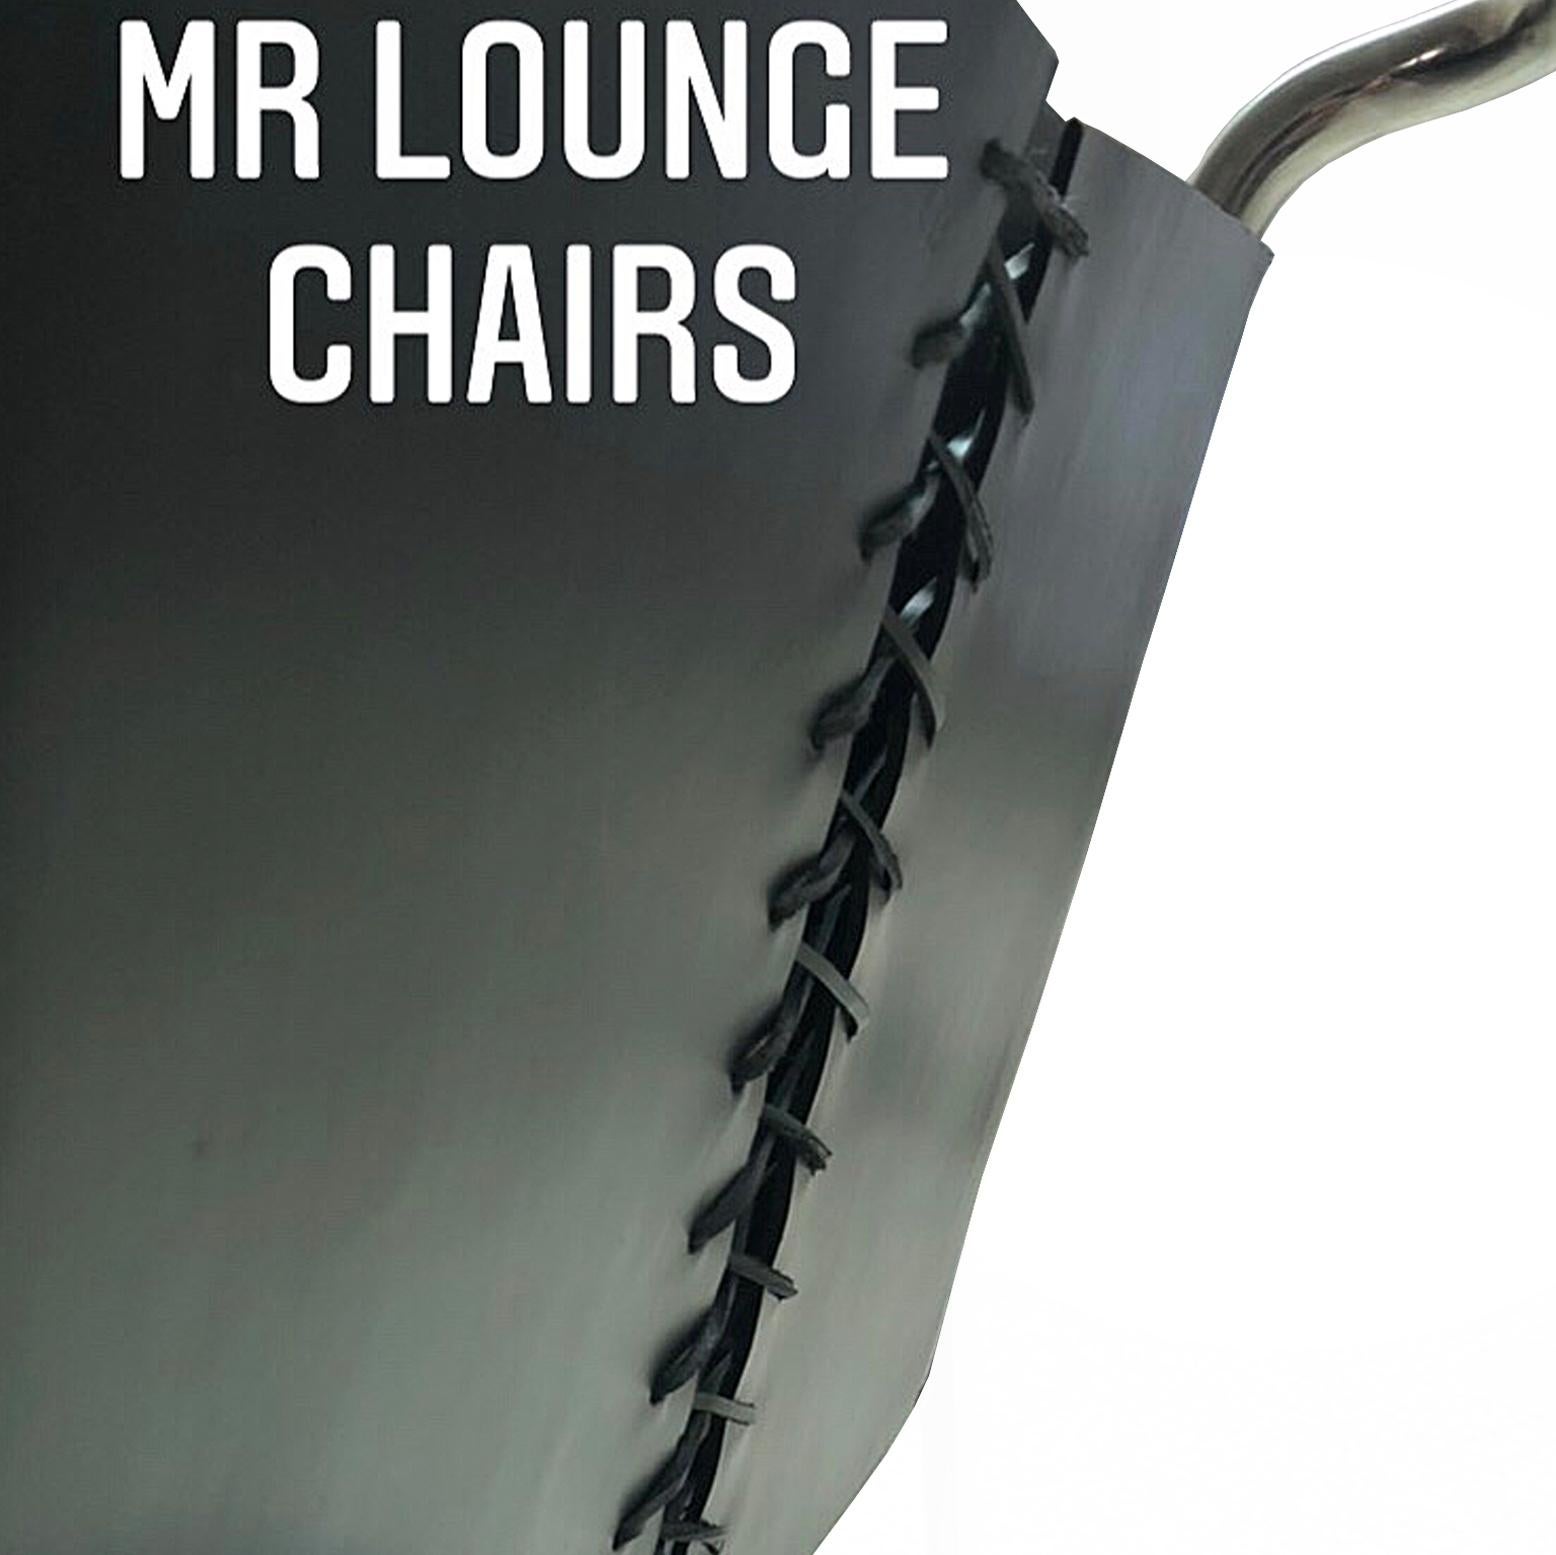 Tubular stainless steel, polished finish seat and back saddle leather sling design by Mies Vean Der Rohe in 1930s this examples ate from 1070s manufactured by Knoll Associates paper label to one chair.